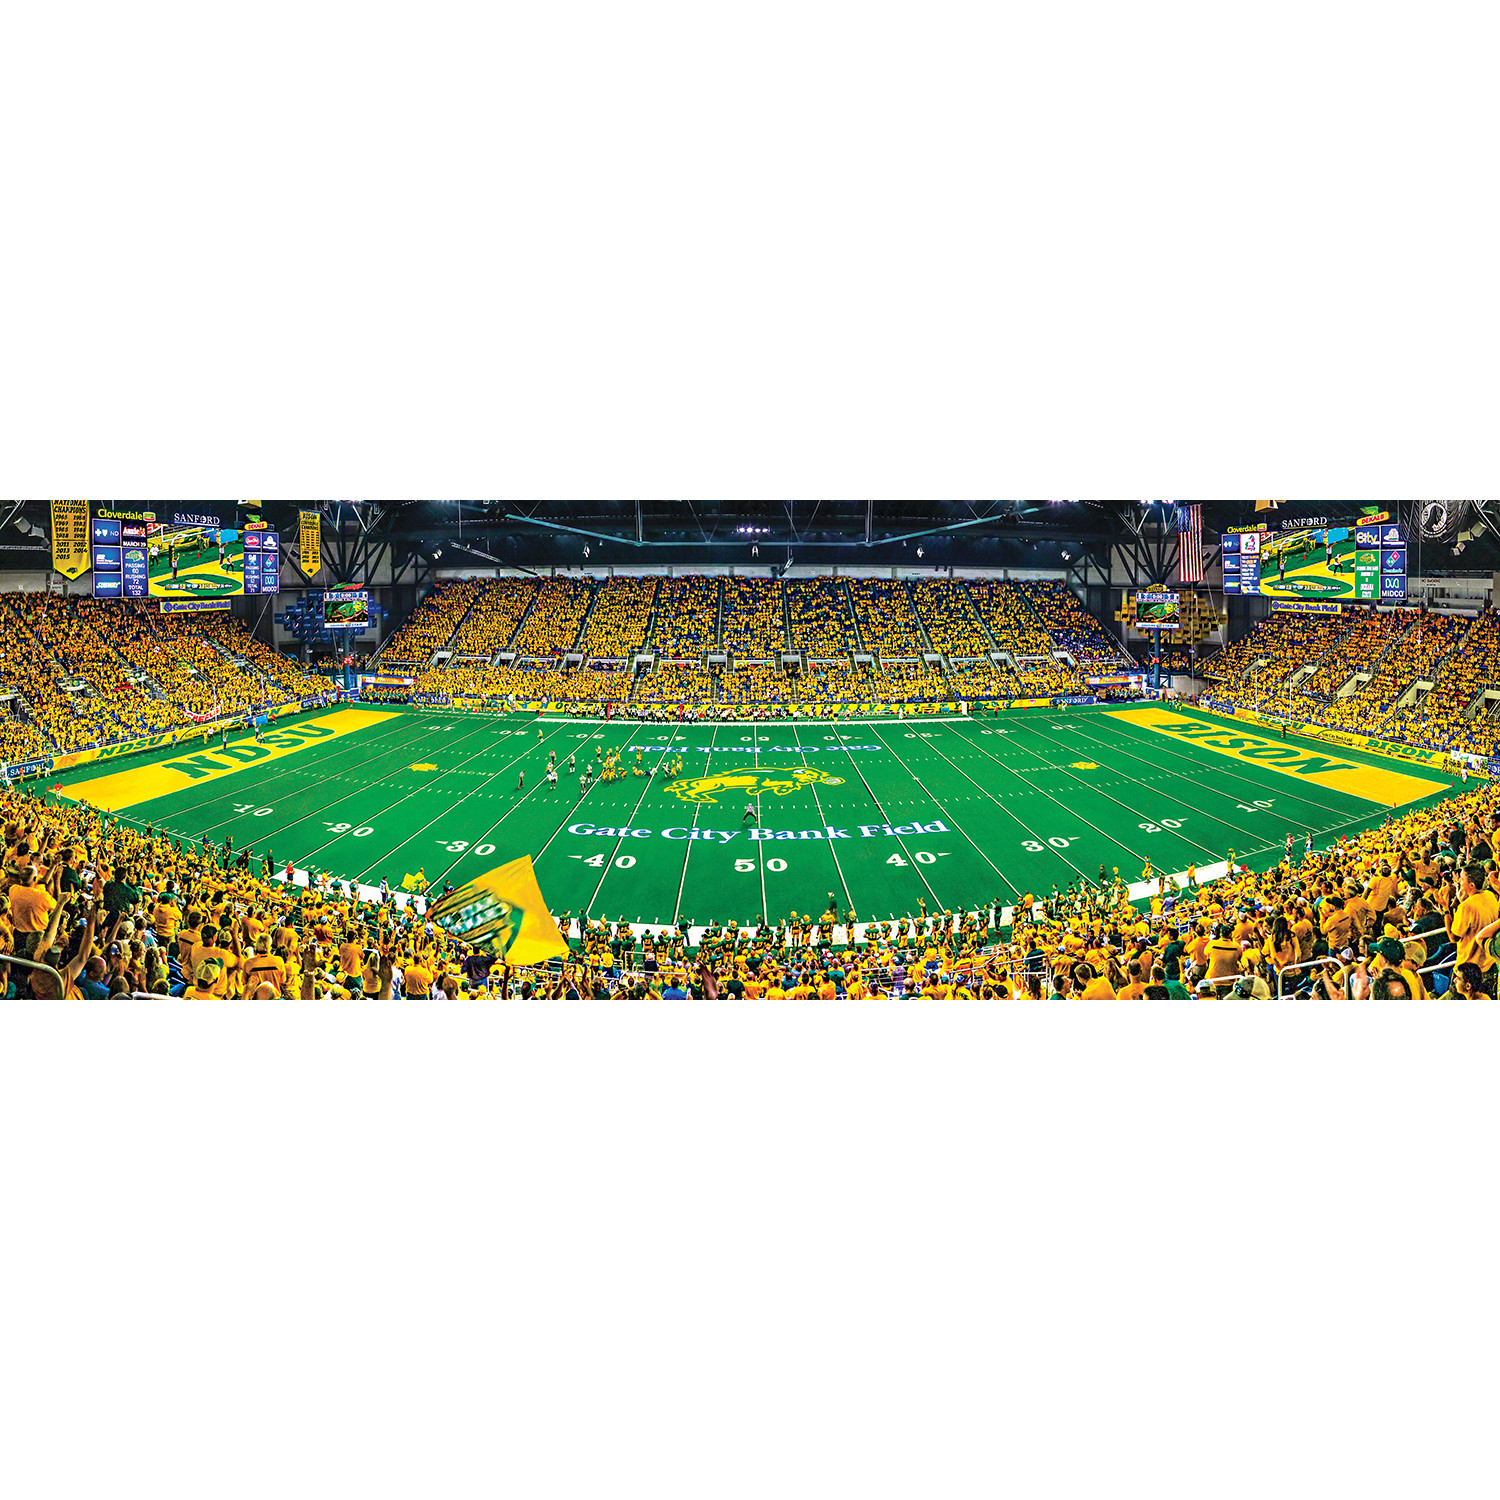 MasterPieces Panoramic Puzzle - NCAA North Dakota State Bison Center View - image 3 of 4